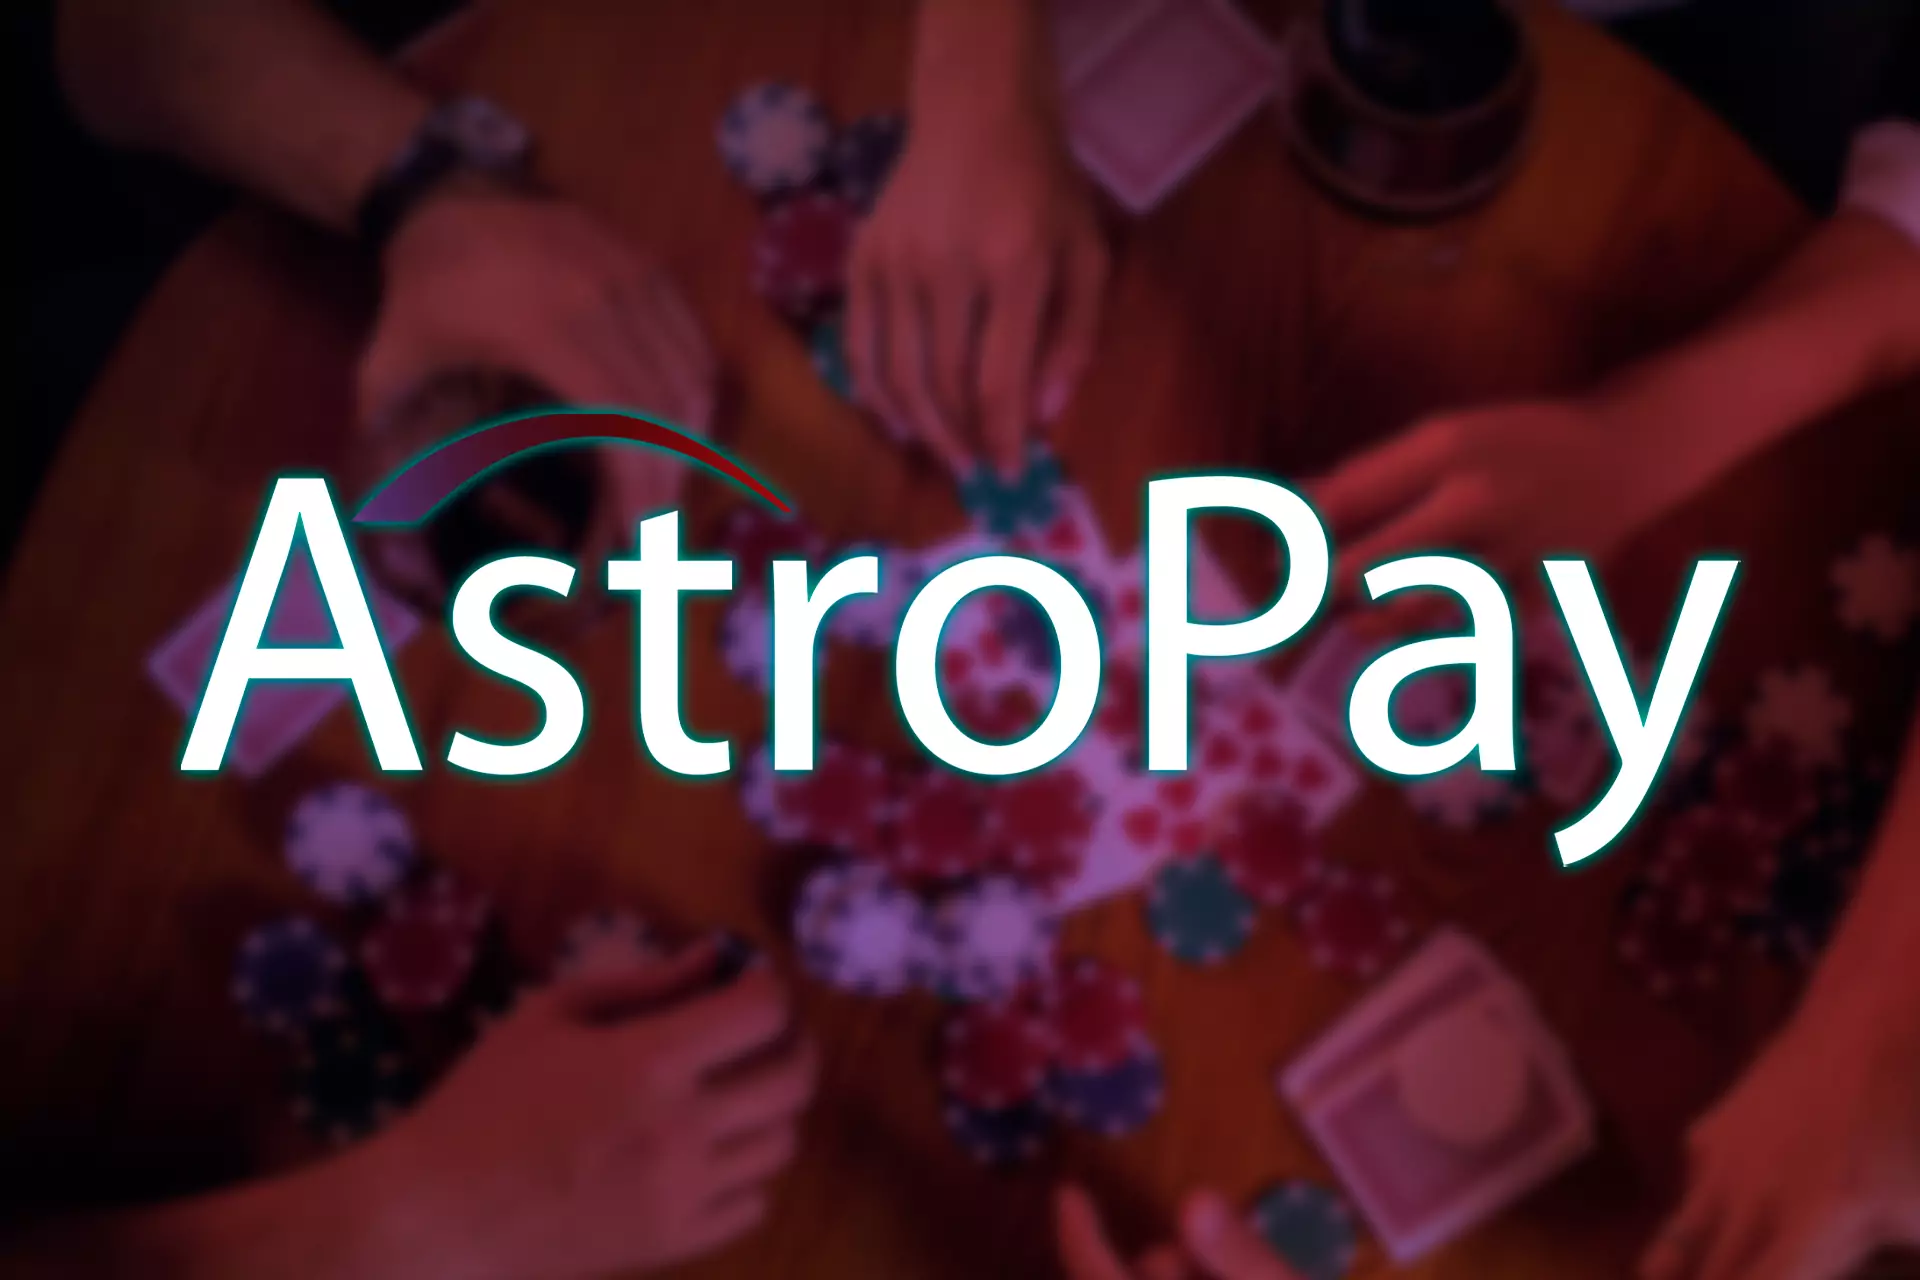 Astropay Cards are quite a popular payment method among casino players from India.